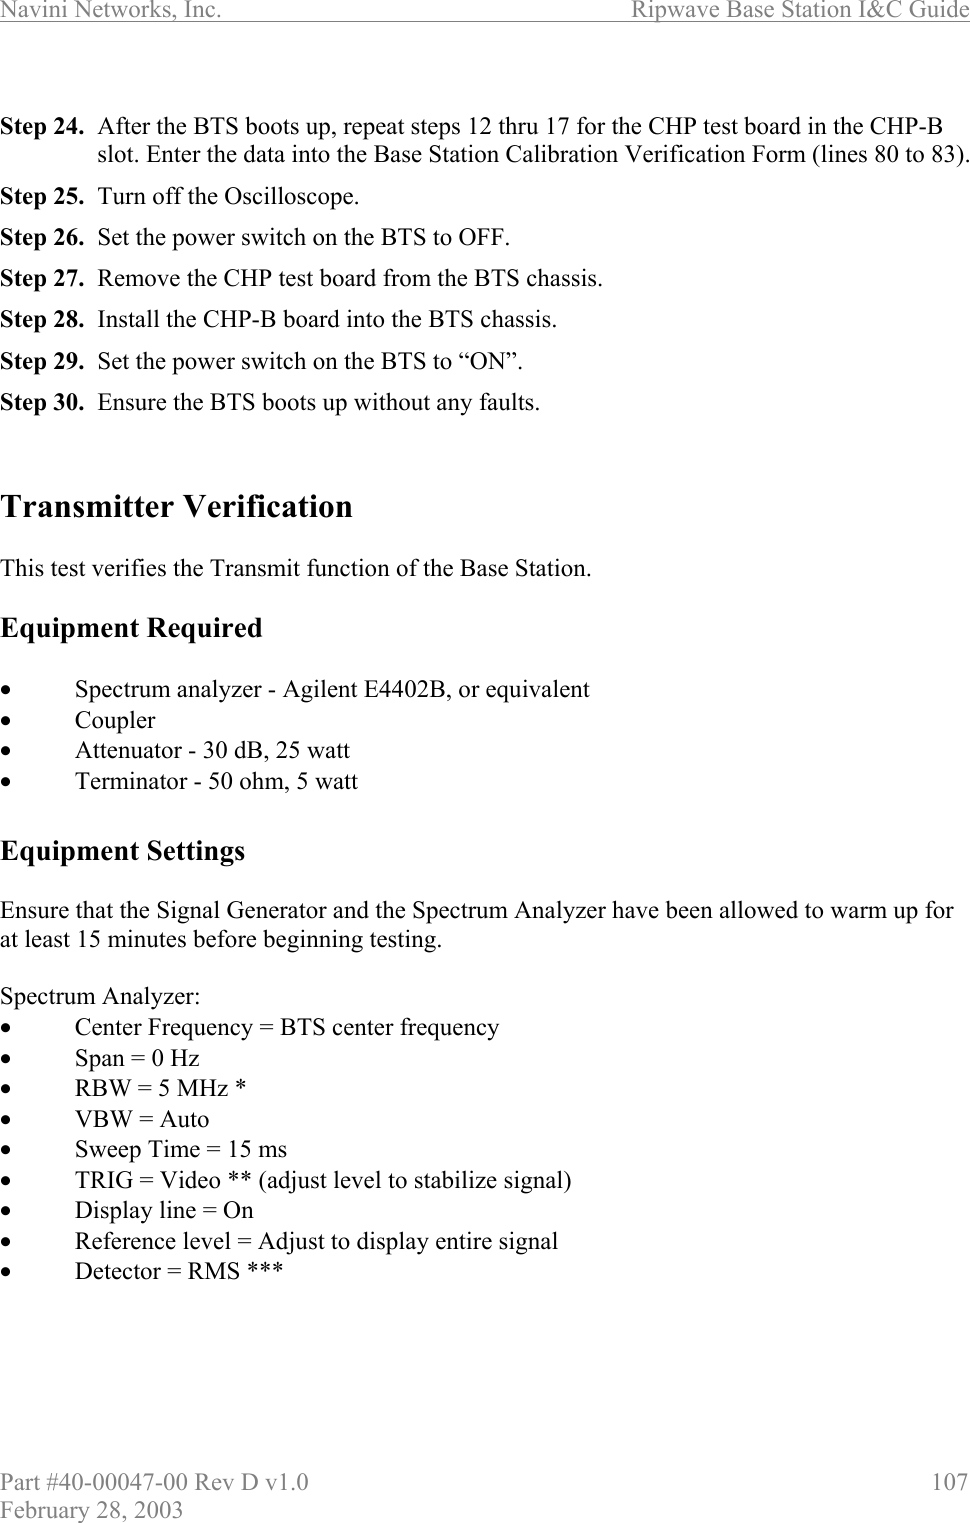 Navini Networks, Inc.                          Ripwave Base Station I&amp;C Guide Part #40-00047-00 Rev D v1.0                     107 February 28, 2003  Step 24.  After the BTS boots up, repeat steps 12 thru 17 for the CHP test board in the CHP-B slot. Enter the data into the Base Station Calibration Verification Form (lines 80 to 83). Step 25.  Turn off the Oscilloscope. Step 26.  Set the power switch on the BTS to OFF.  Step 27.  Remove the CHP test board from the BTS chassis. Step 28.  Install the CHP-B board into the BTS chassis. Step 29.  Set the power switch on the BTS to “ON”. Step 30.  Ensure the BTS boots up without any faults.   Transmitter Verification  This test verifies the Transmit function of the Base Station.  Equipment Required  •  Spectrum analyzer - Agilent E4402B, or equivalent  •  Coupler •  Attenuator - 30 dB, 25 watt •  Terminator - 50 ohm, 5 watt  Equipment Settings  Ensure that the Signal Generator and the Spectrum Analyzer have been allowed to warm up for at least 15 minutes before beginning testing.   Spectrum Analyzer: •  Center Frequency = BTS center frequency •  Span = 0 Hz •  RBW = 5 MHz * •  VBW = Auto •  Sweep Time = 15 ms •  TRIG = Video ** (adjust level to stabilize signal) •  Display line = On •  Reference level = Adjust to display entire signal •  Detector = RMS ***     